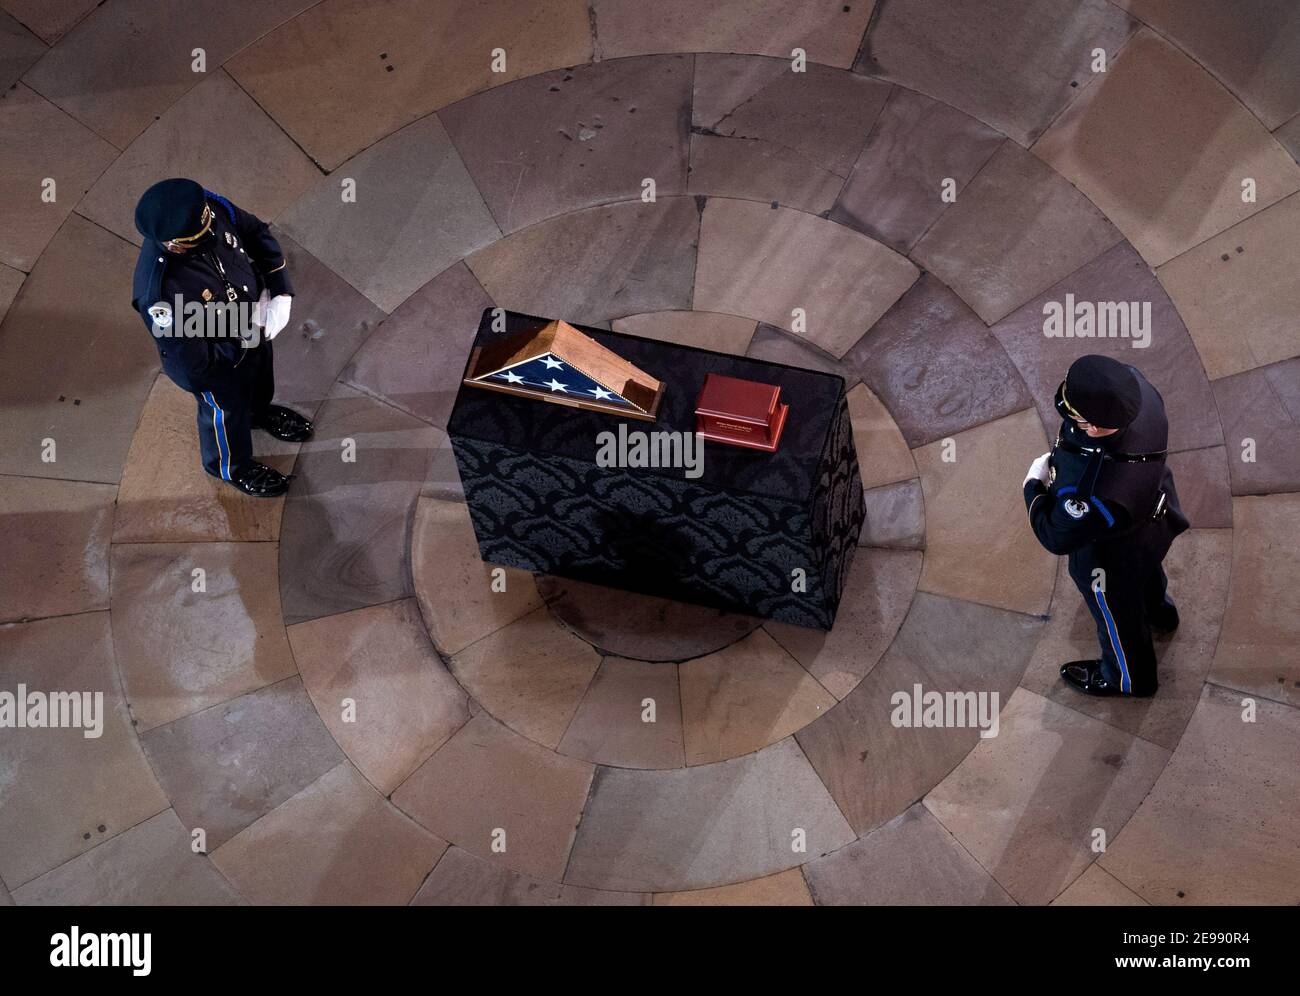 Capitol Hill Police Officer Brian Sicknick lies in honor in the Rotunda of the U.S. Capitol Building in Washington, DC on Tuesday, February 3, 2021. Sicknick died from injures sustained during the January 6 riot at the U.S. Capitol.Credit: Kevin Dietsch/Pool via CNP /MediaPunch Stock Photo